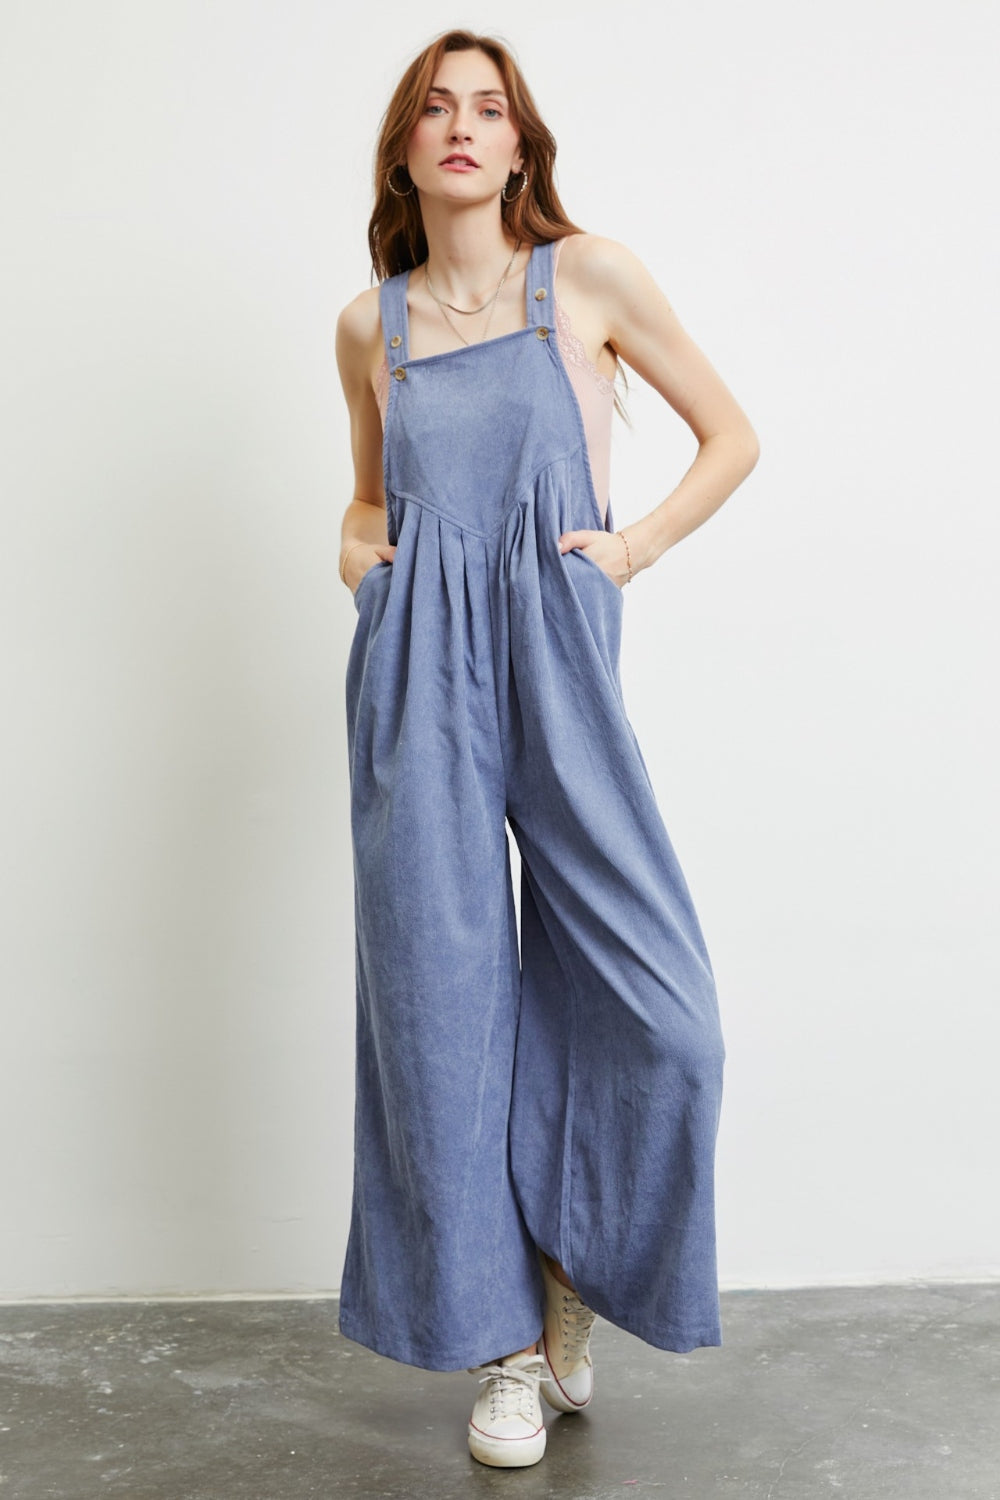 Womens Denim Overalls | HEYSON Full Size Wide Leg Overalls with Pockets